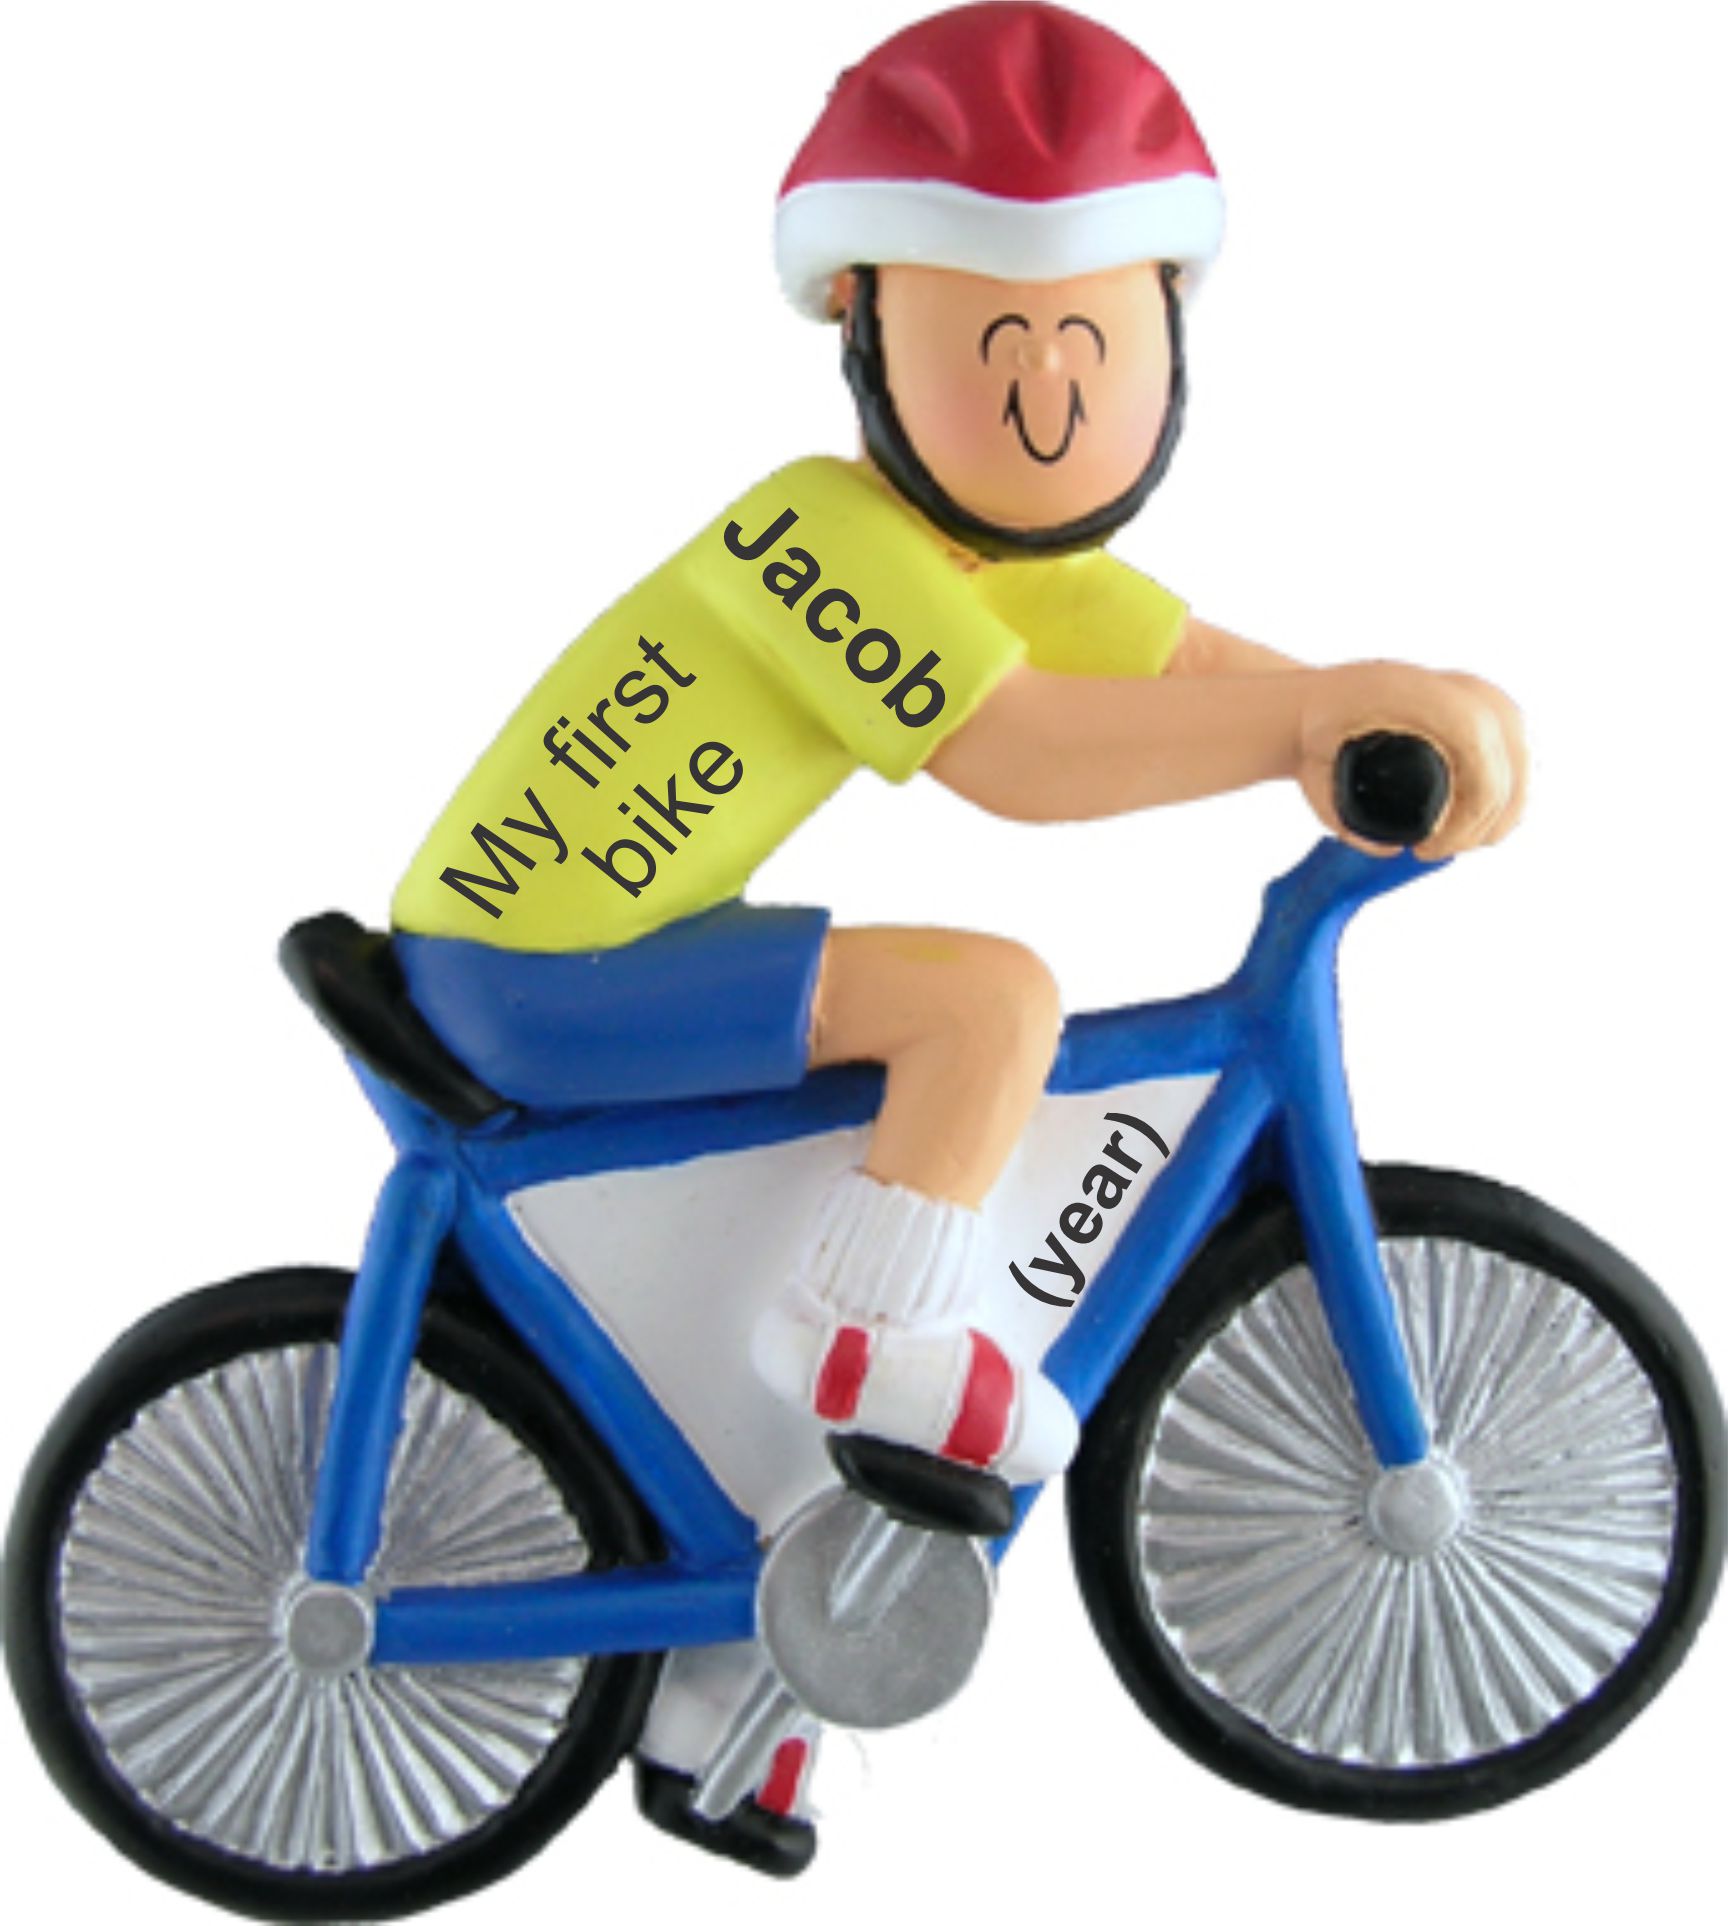 My First Bike Male Christmas Ornament Personalized by Russell Rhodes